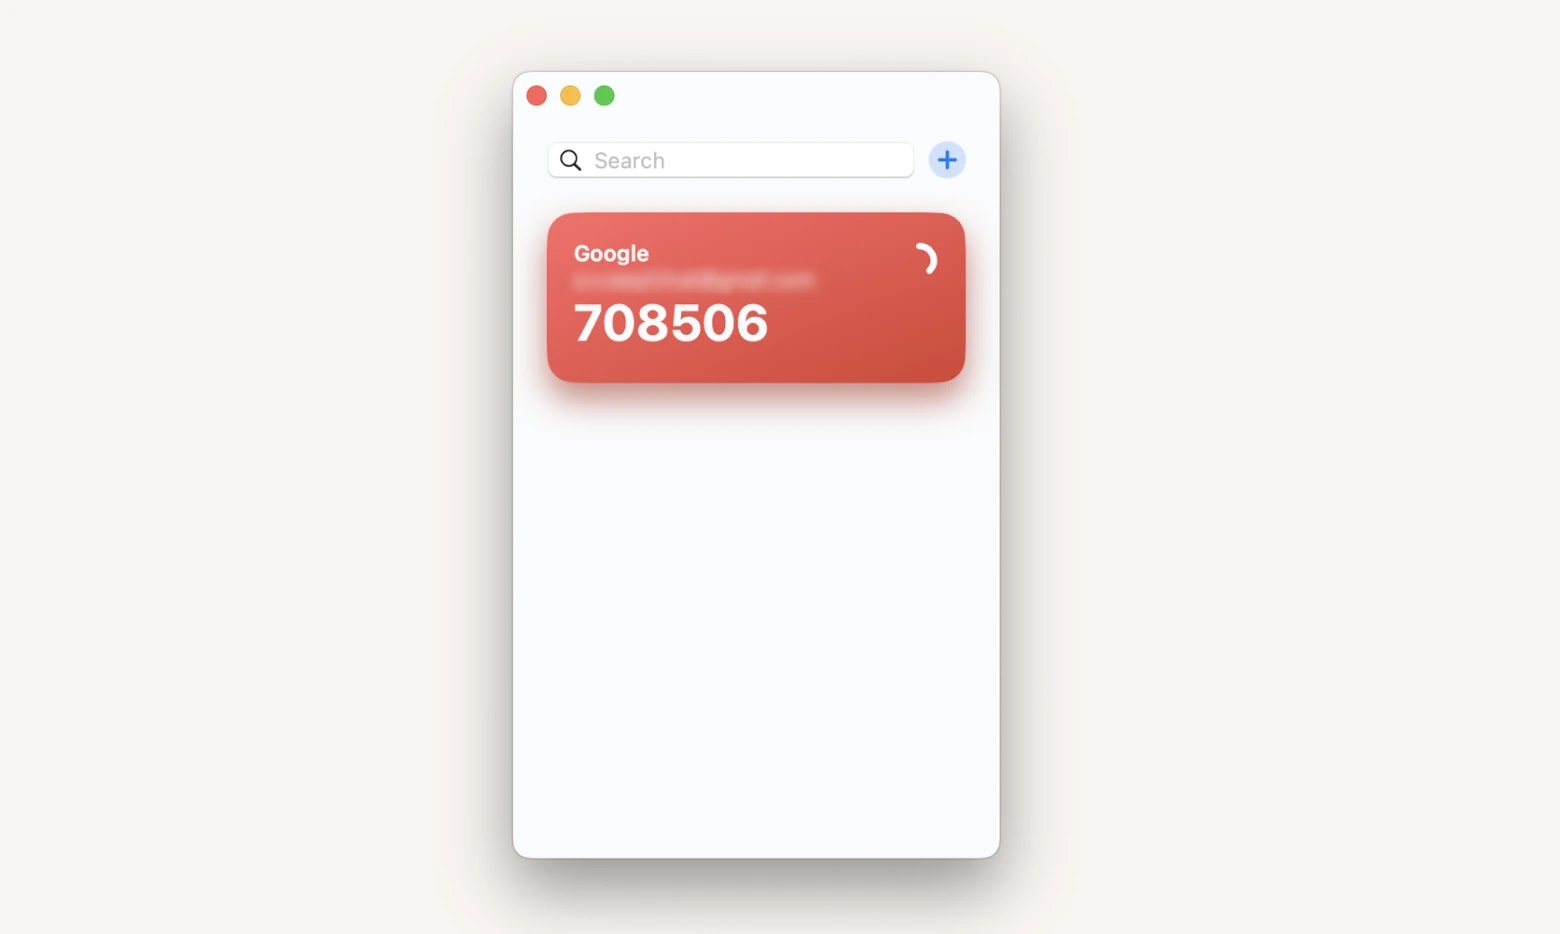 Step Two is generate a time-based one-time password for Google